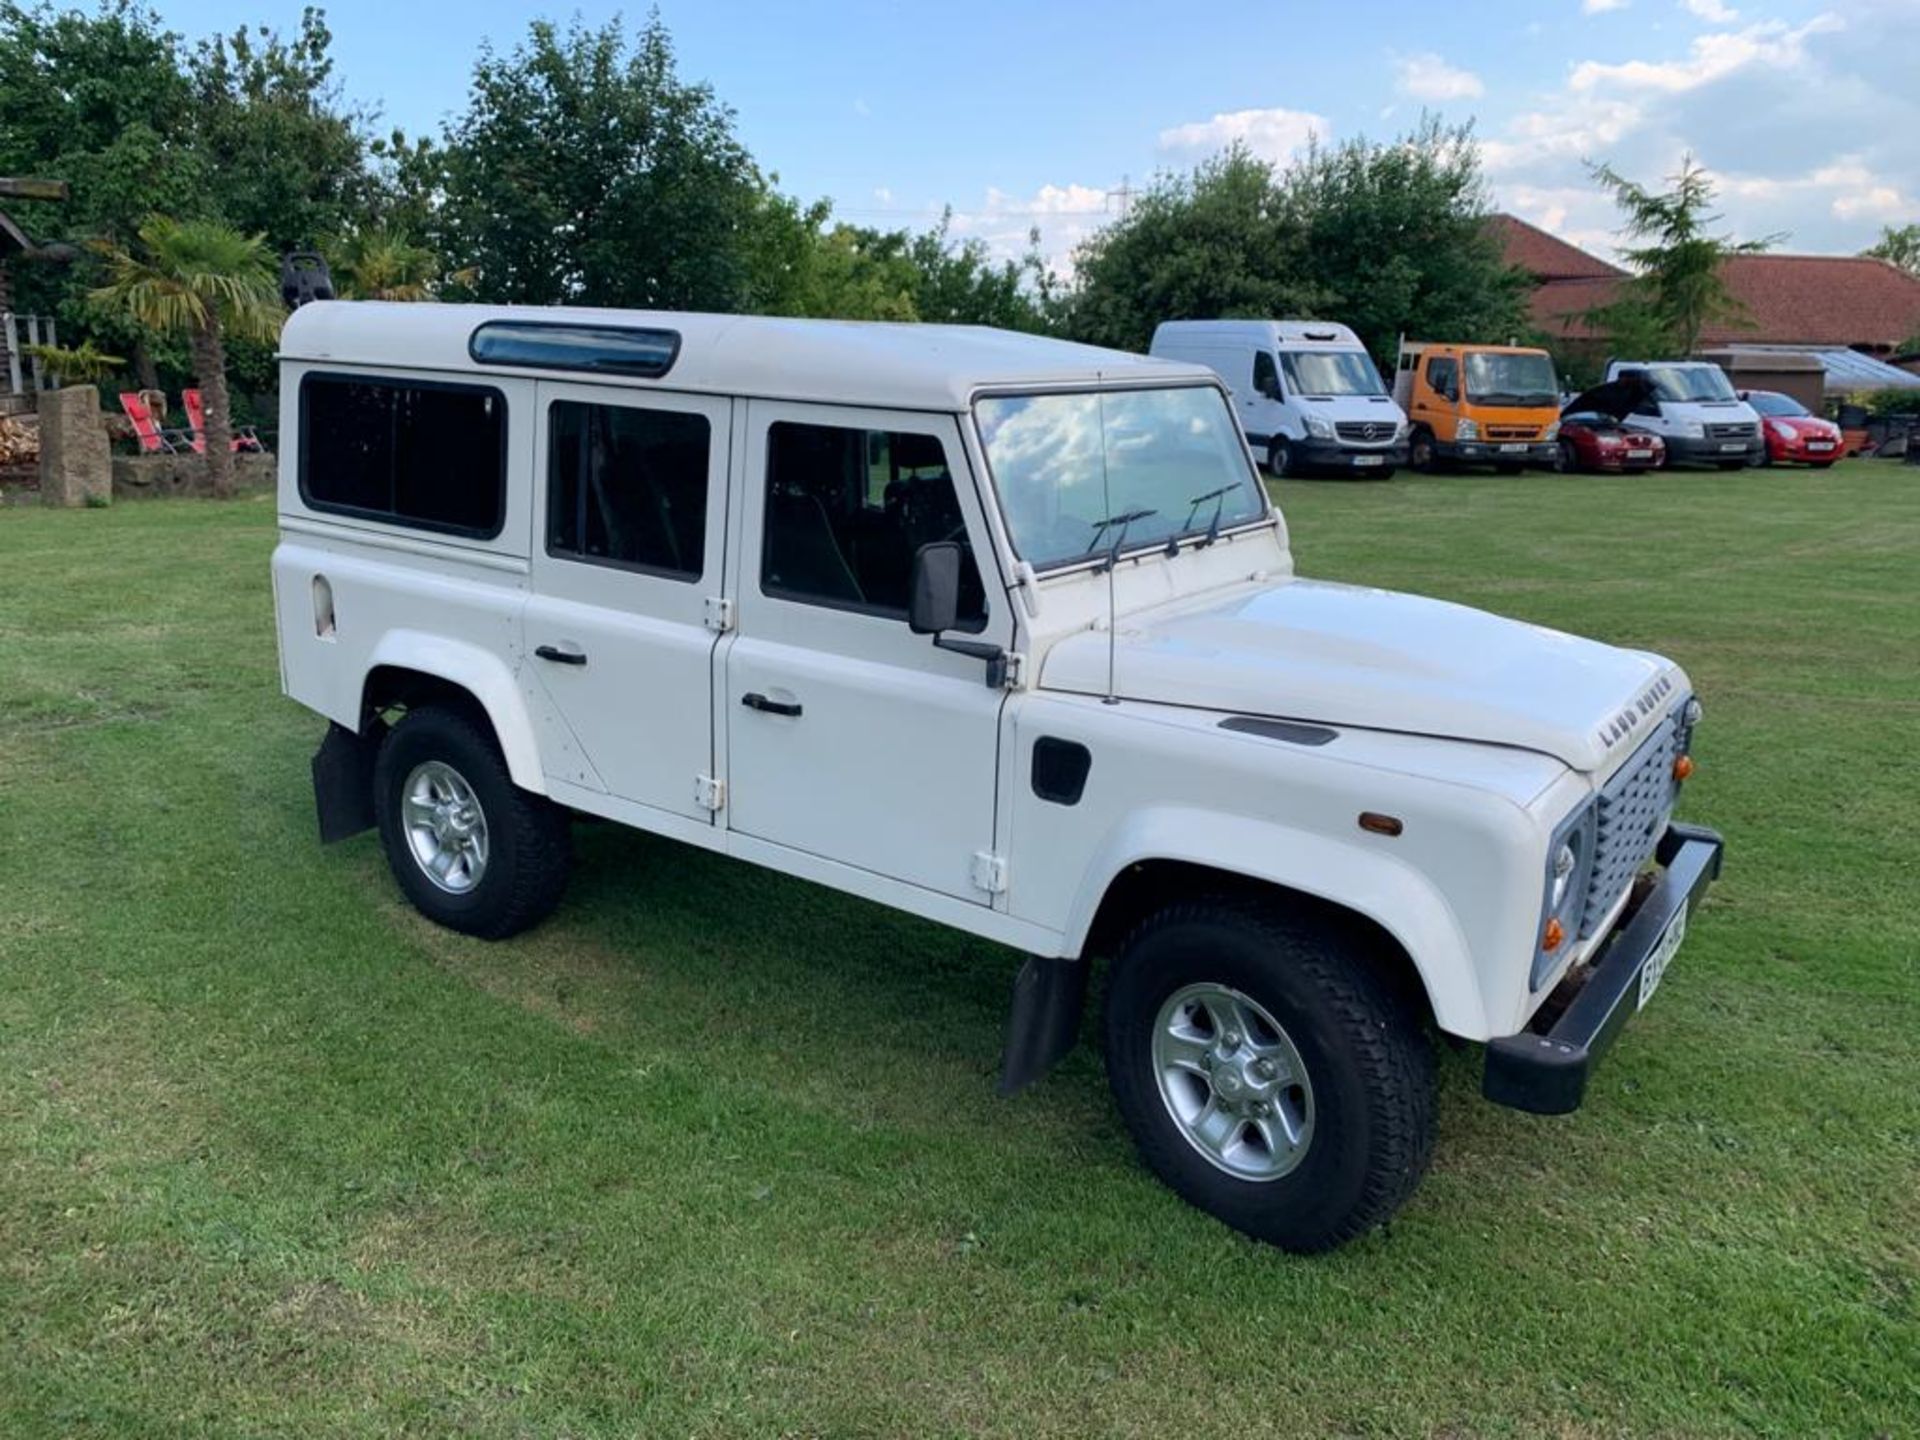 2008/58 REG LAND ROVER 110 LWB DEFENDER COUNTY STATION WAGON 2.4 DIESEL 120BHP OWNED BY BT OPENREACH